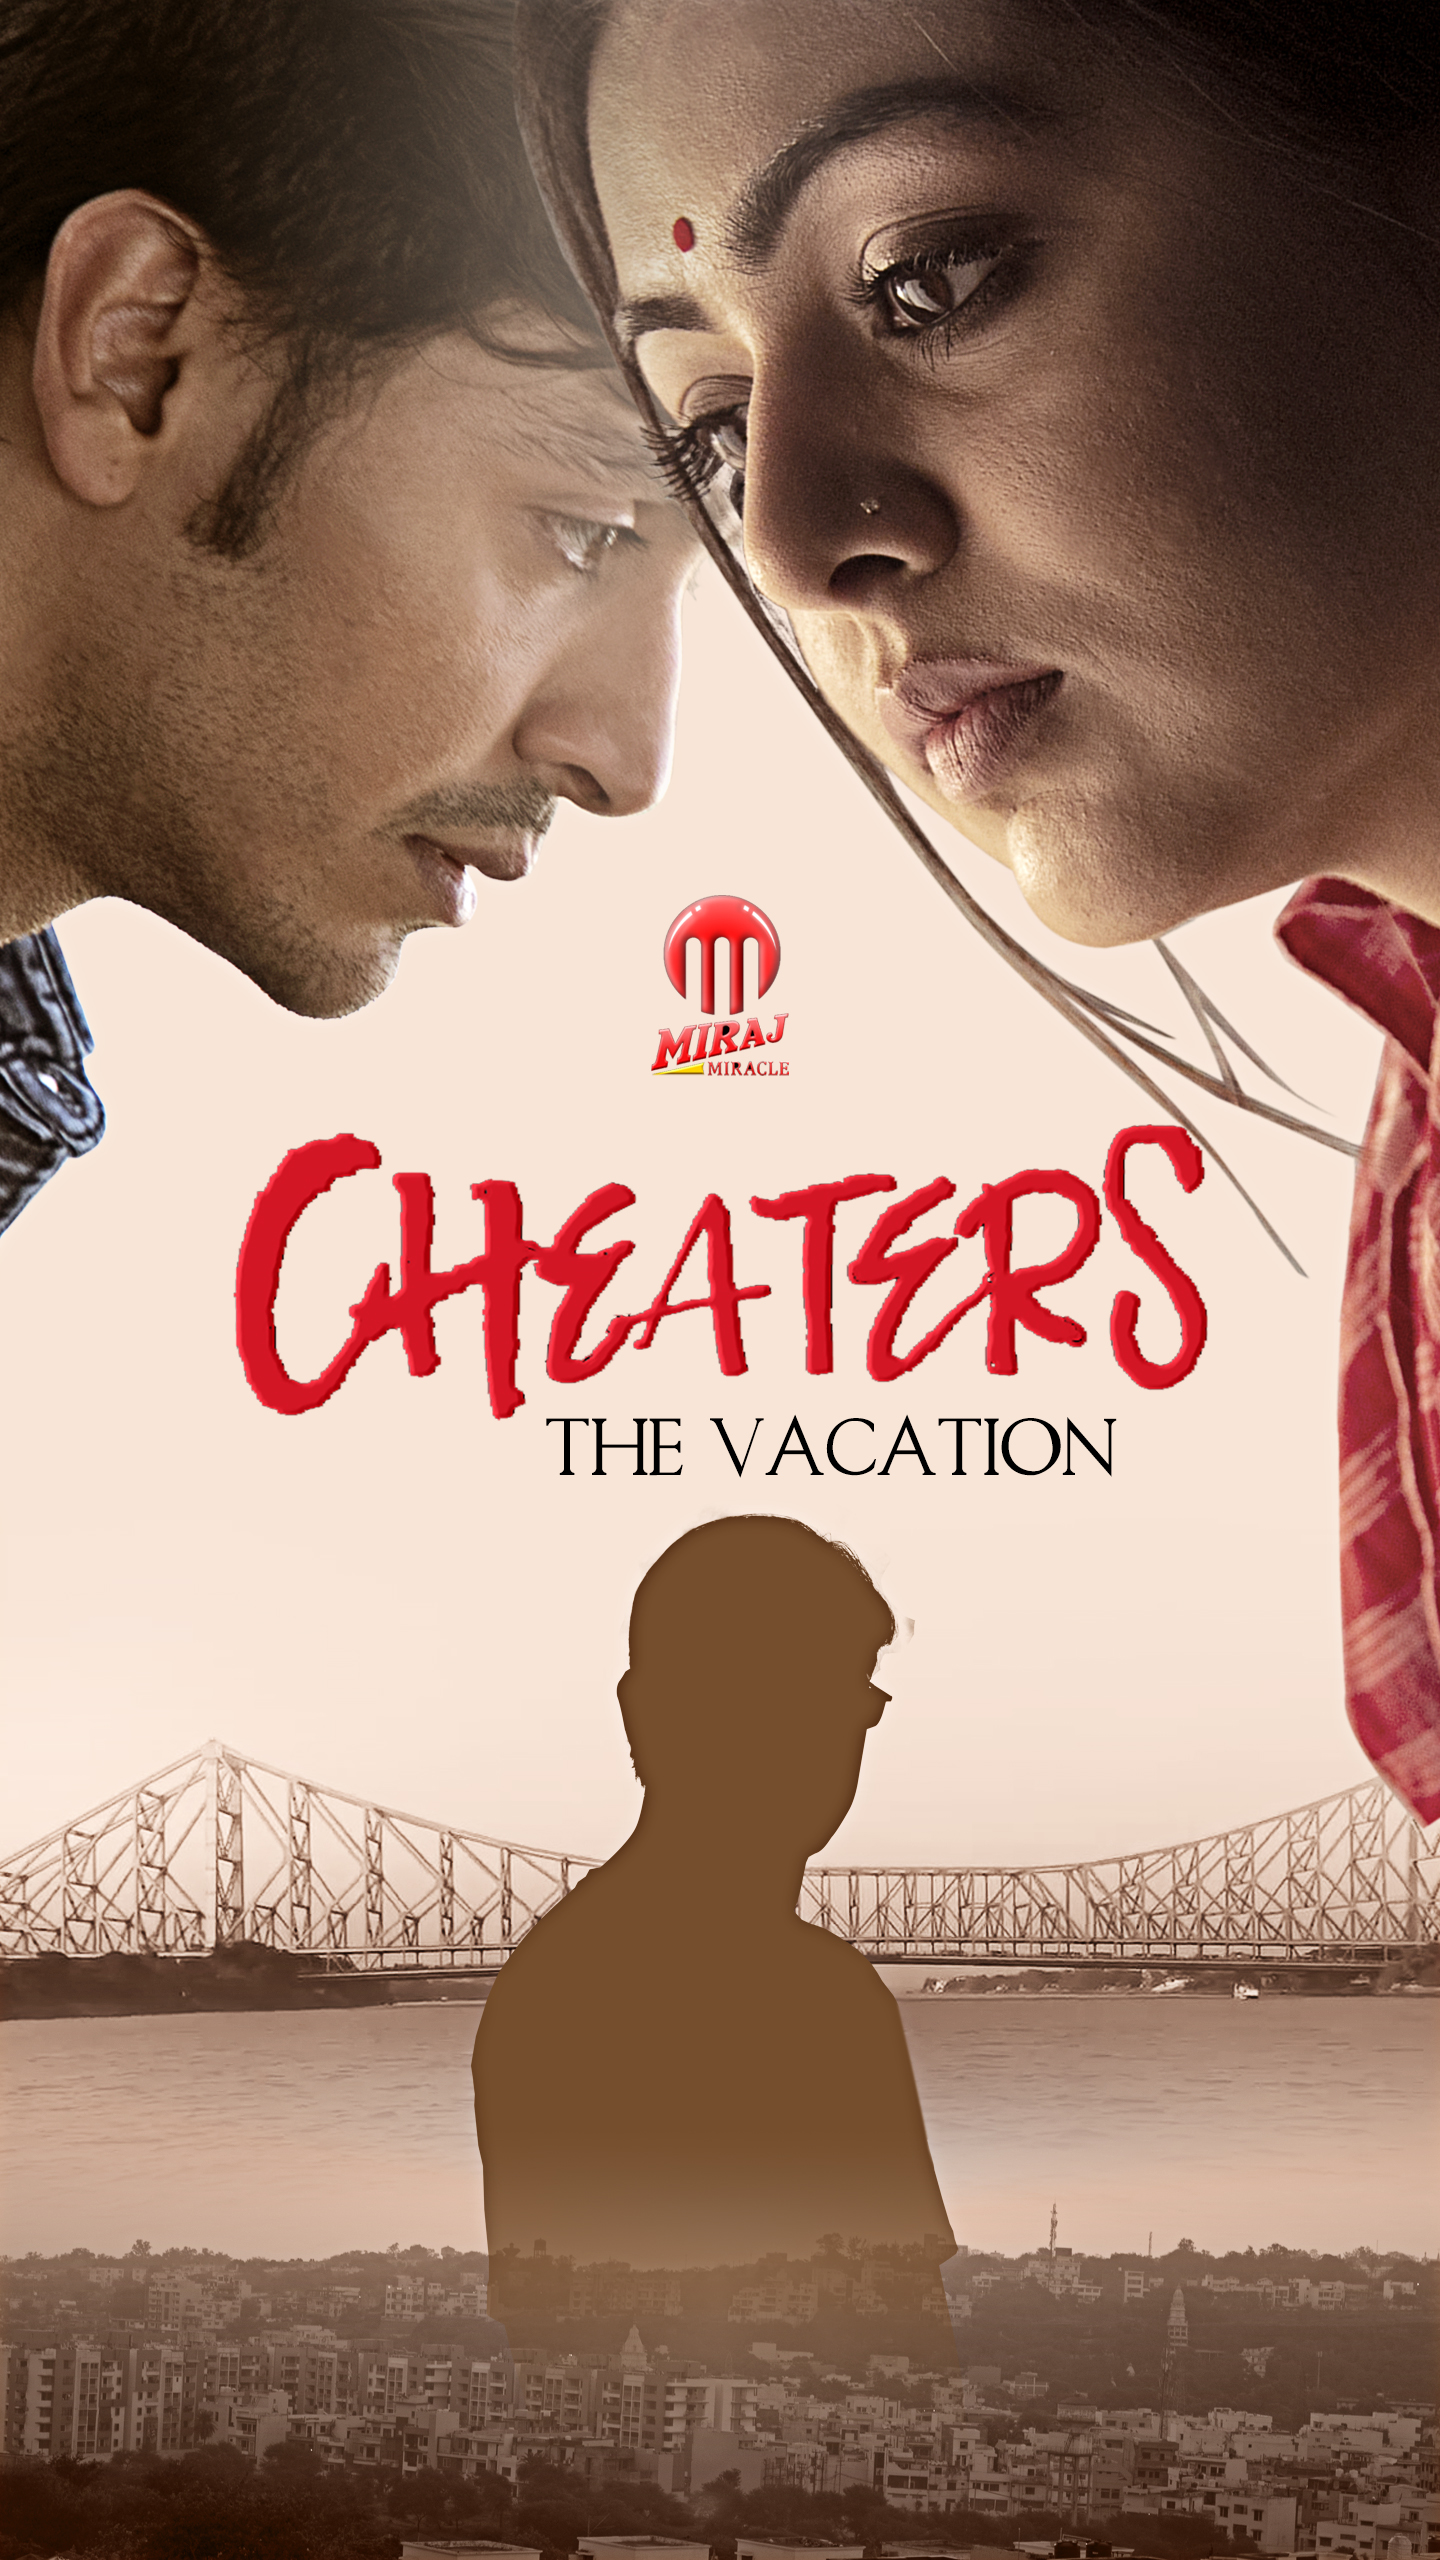 Cheaters - The Vacation